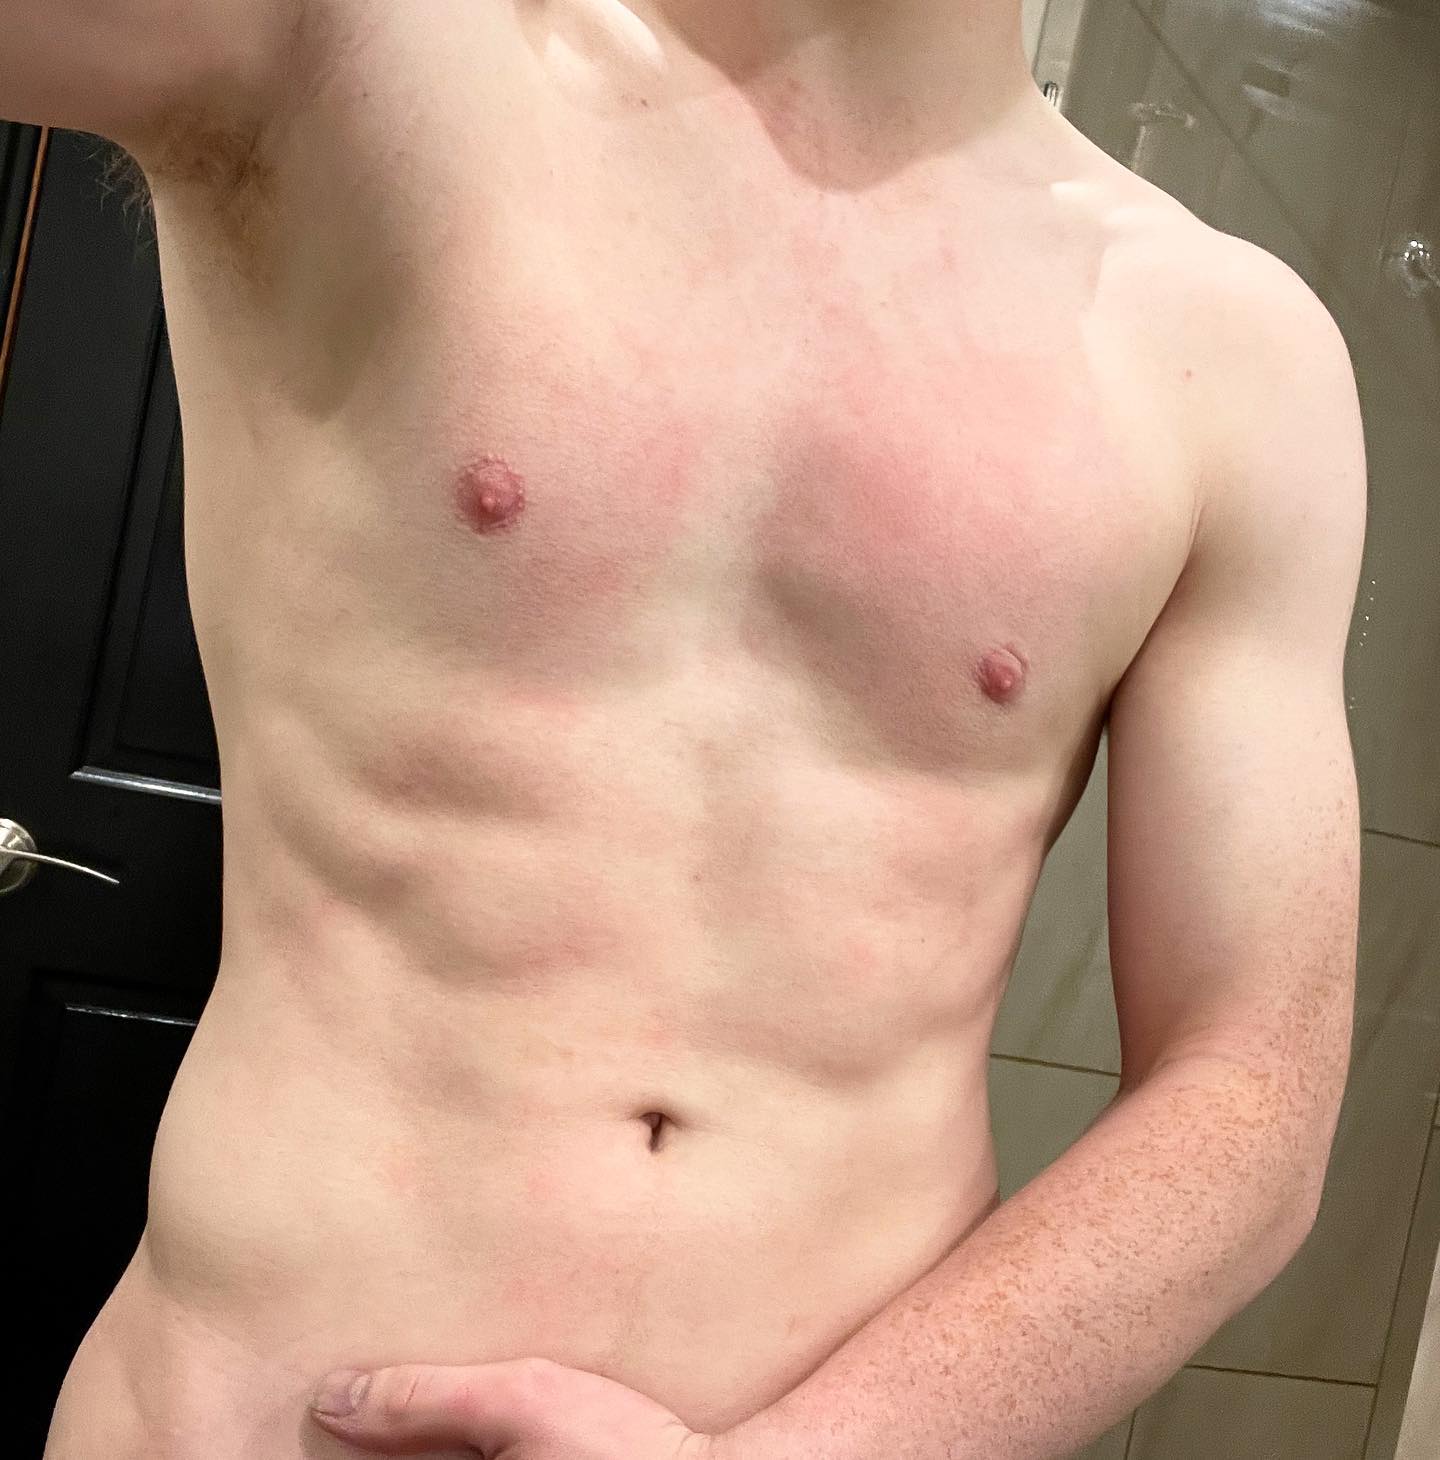 Being this fair skinned means I can actually draw red lines onto my skin after a shower just by drying myself with my towel. Something to do with blood cells I’m sure. 

#shirtless #gym #gymmotivation #workout #fit #abs #pecs #muscle #twink #twinks #twunk #jock #gayny #nygay